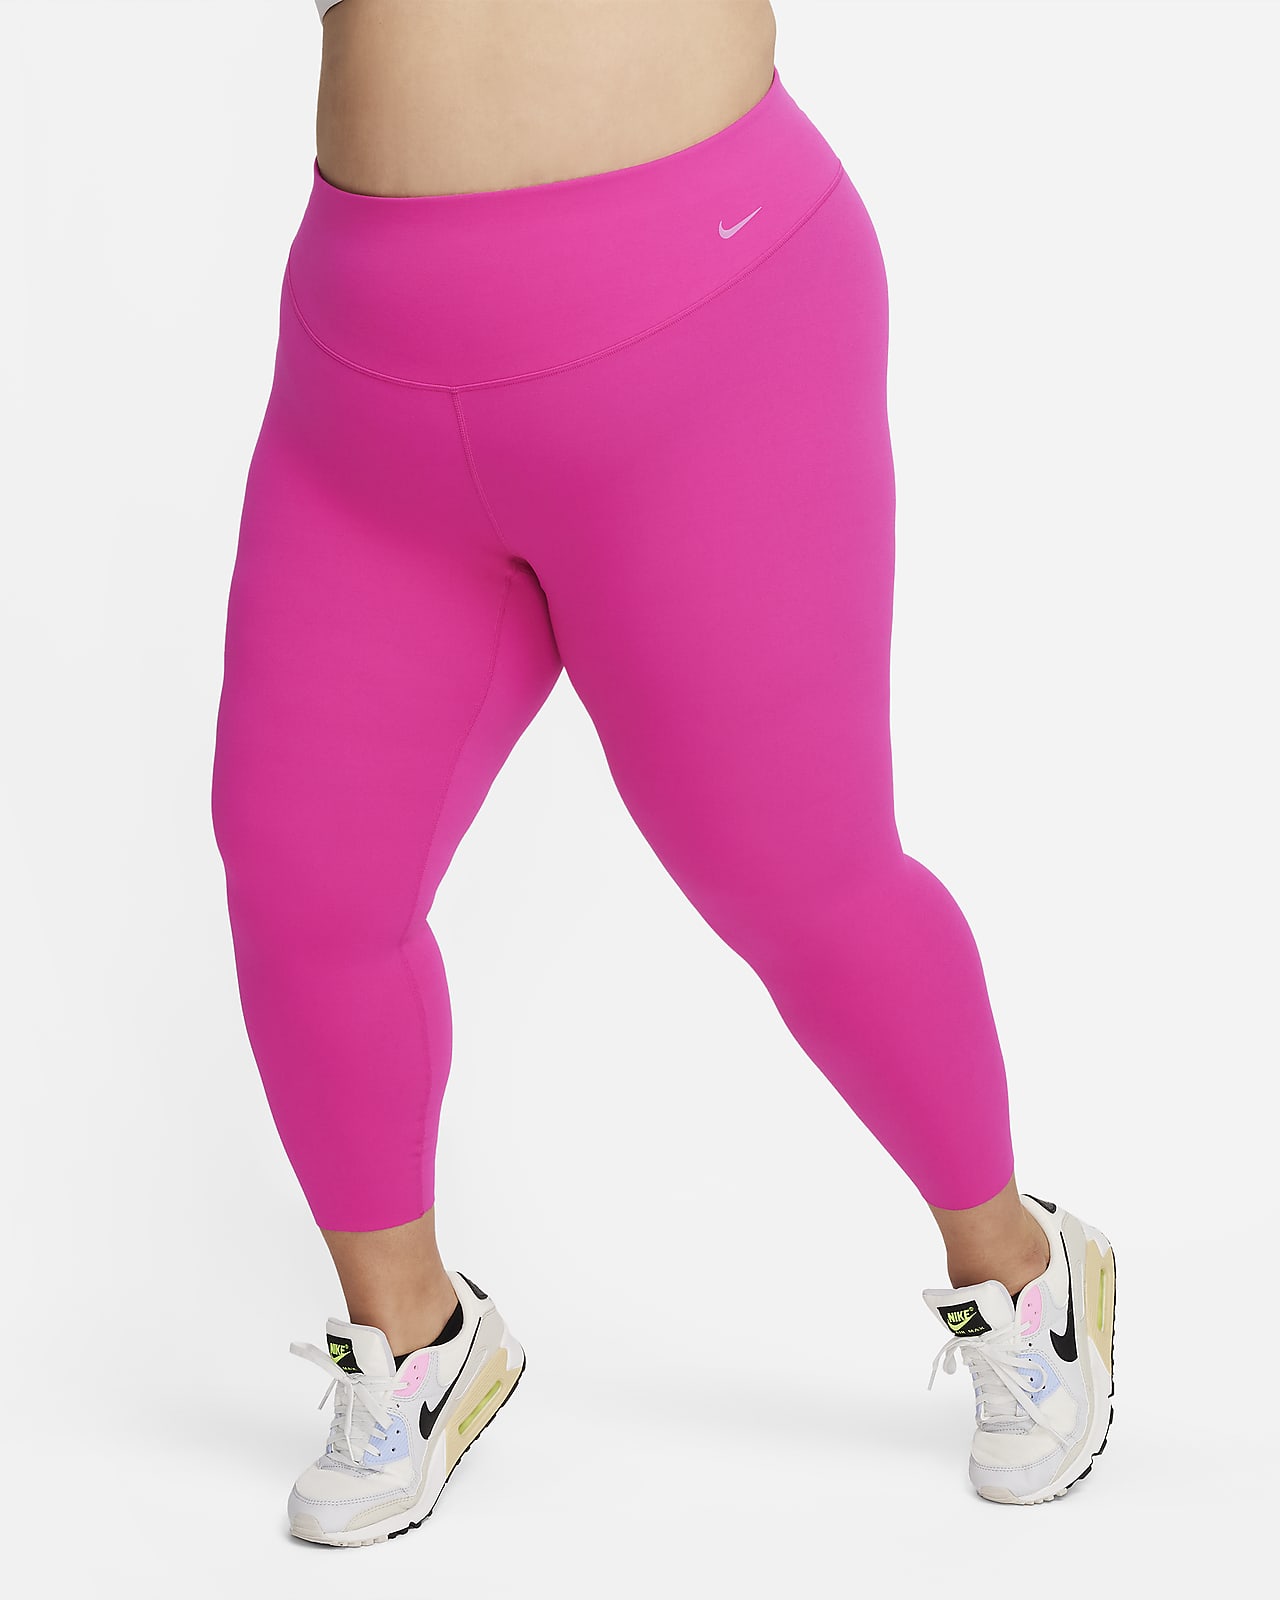 Women's 7/8-Length Training & Gym Trousers & Tights. Nike CA